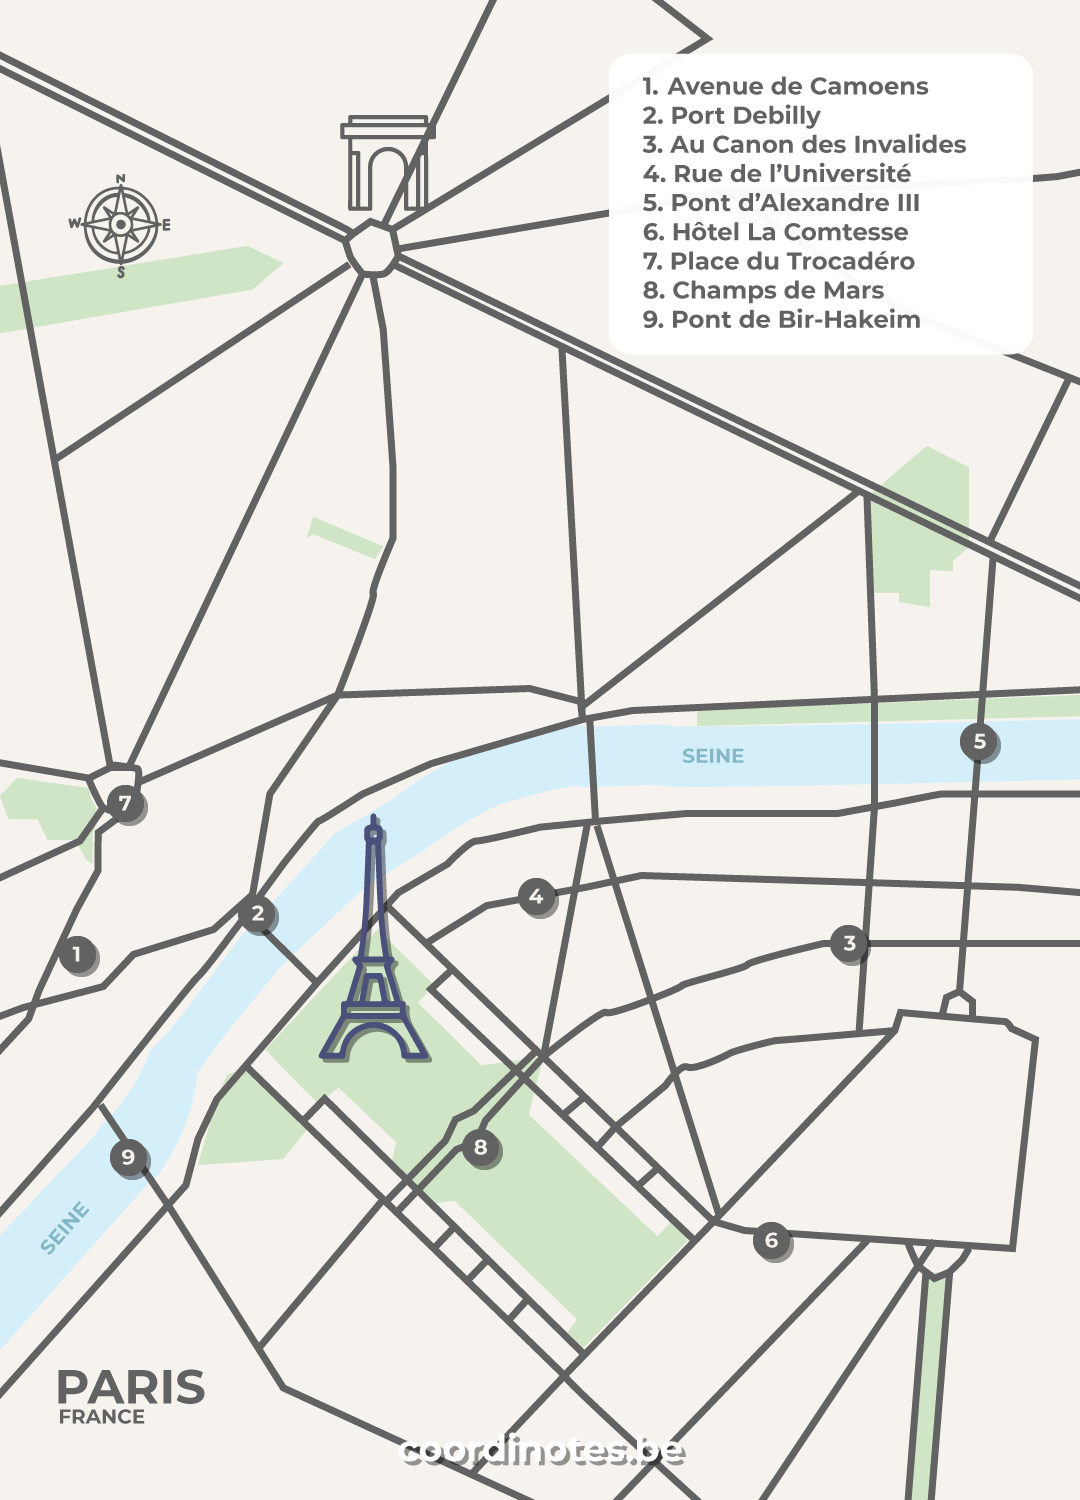 Mmap about the best photo spots for the Eiffel Tower